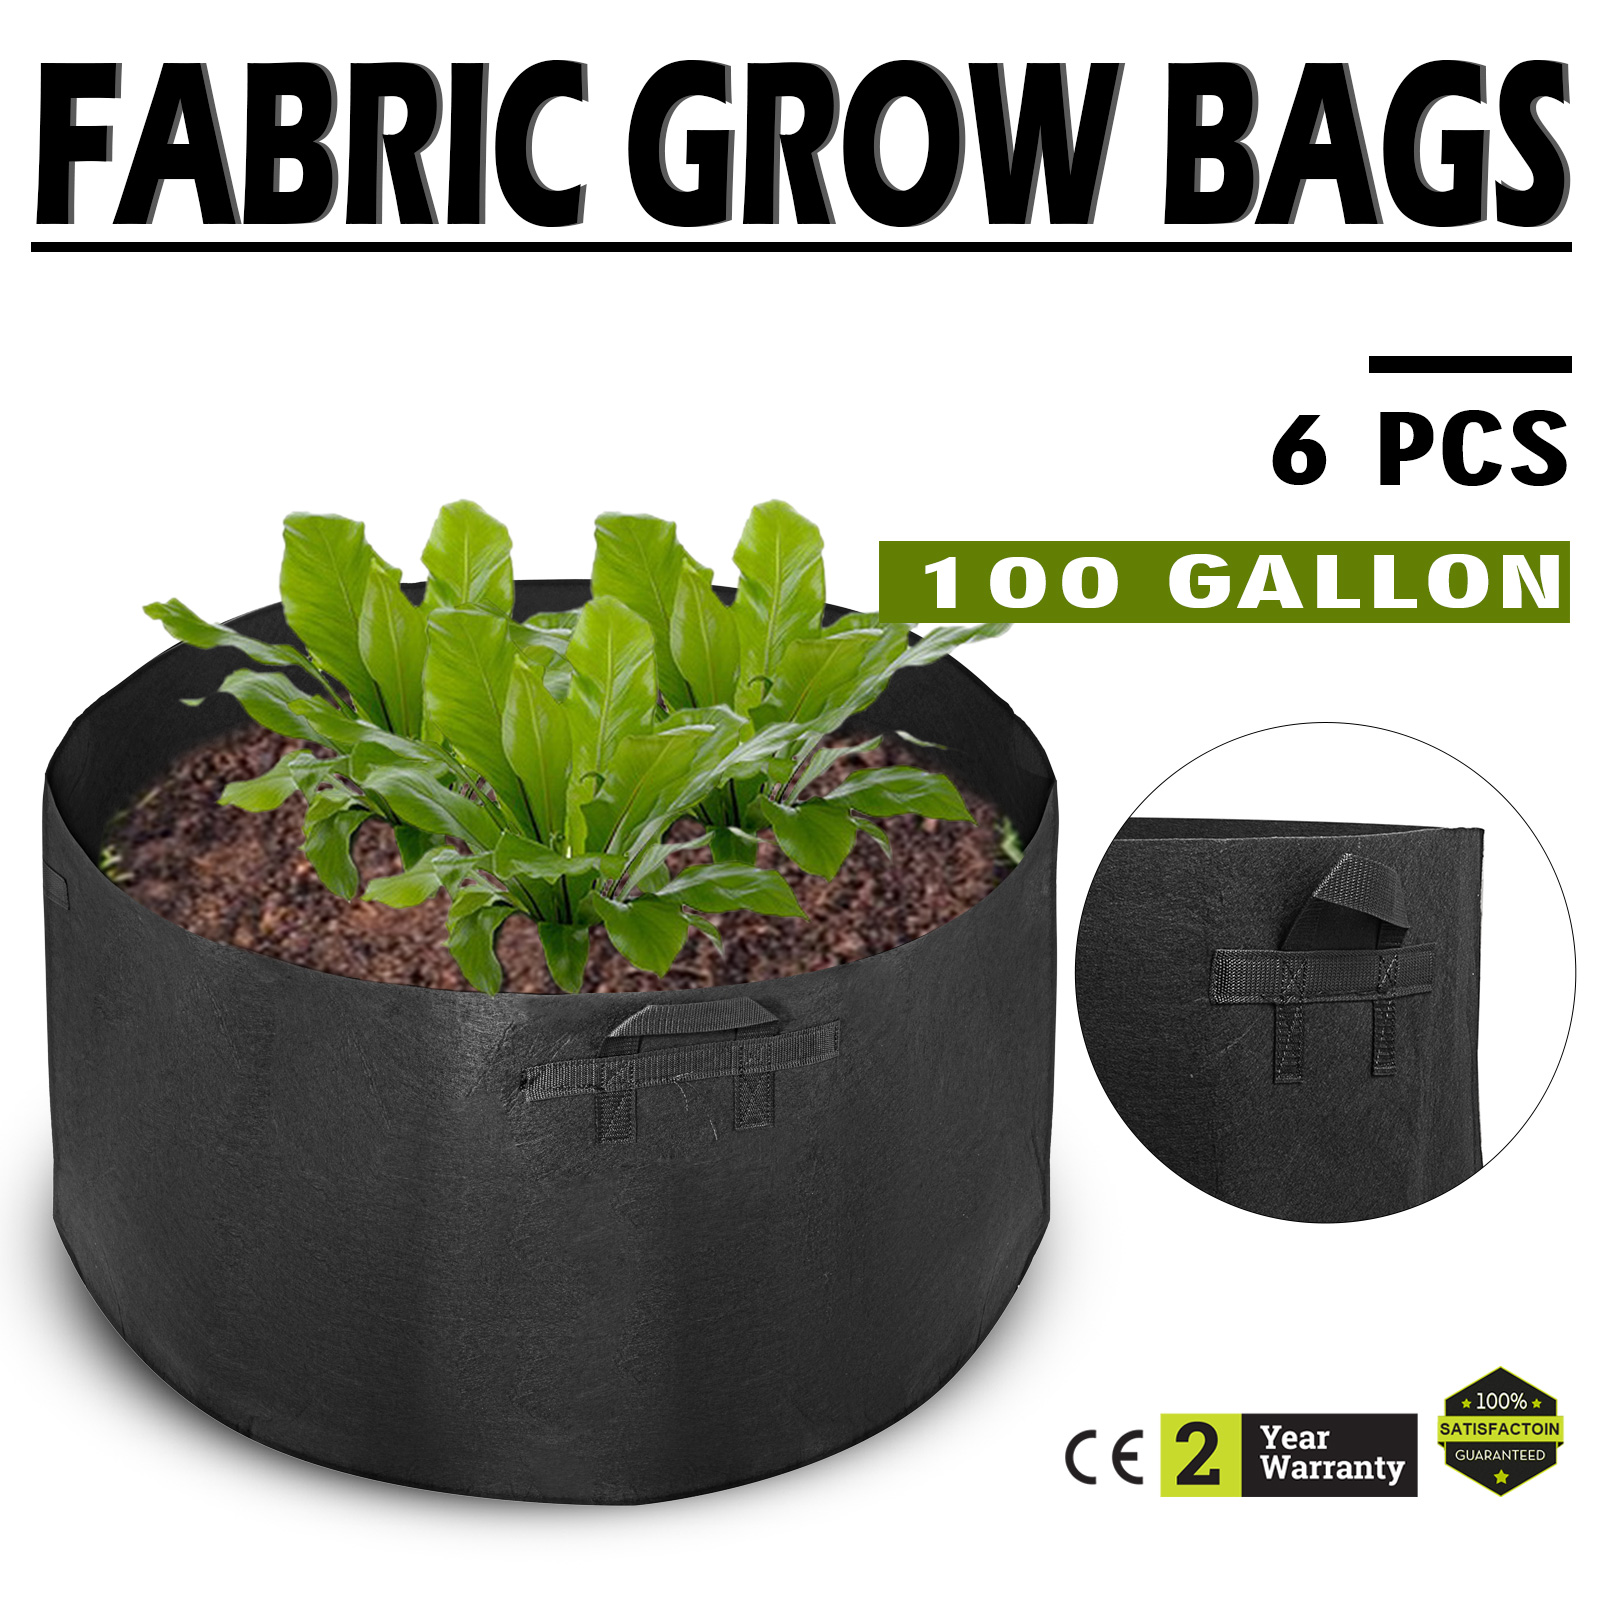 30 Gallon 6pcs/Pack Black Fabric Grow Pots Bags for Hydroponic Plant Growing 